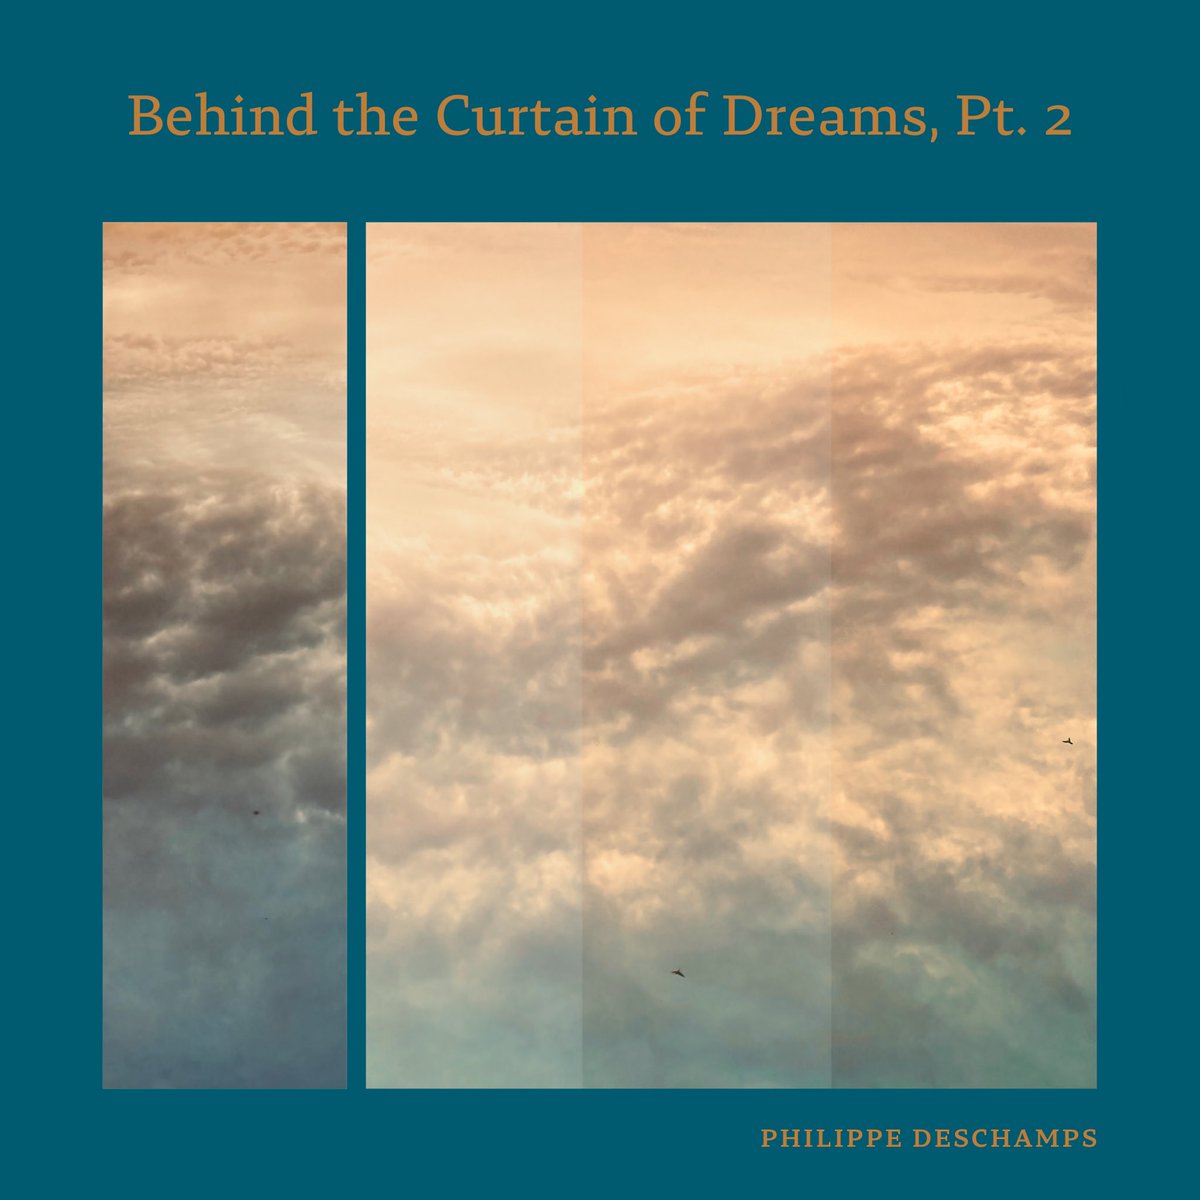 Behind the Curtain of Dreams, Pt. 2 is out today. Calm and ethereal, inspired by the movement of dreams, this is a single that seeks to convey a sense of weightlessness. Streaming links album.link/gpv40dmqkp6f3 #ambient #drone